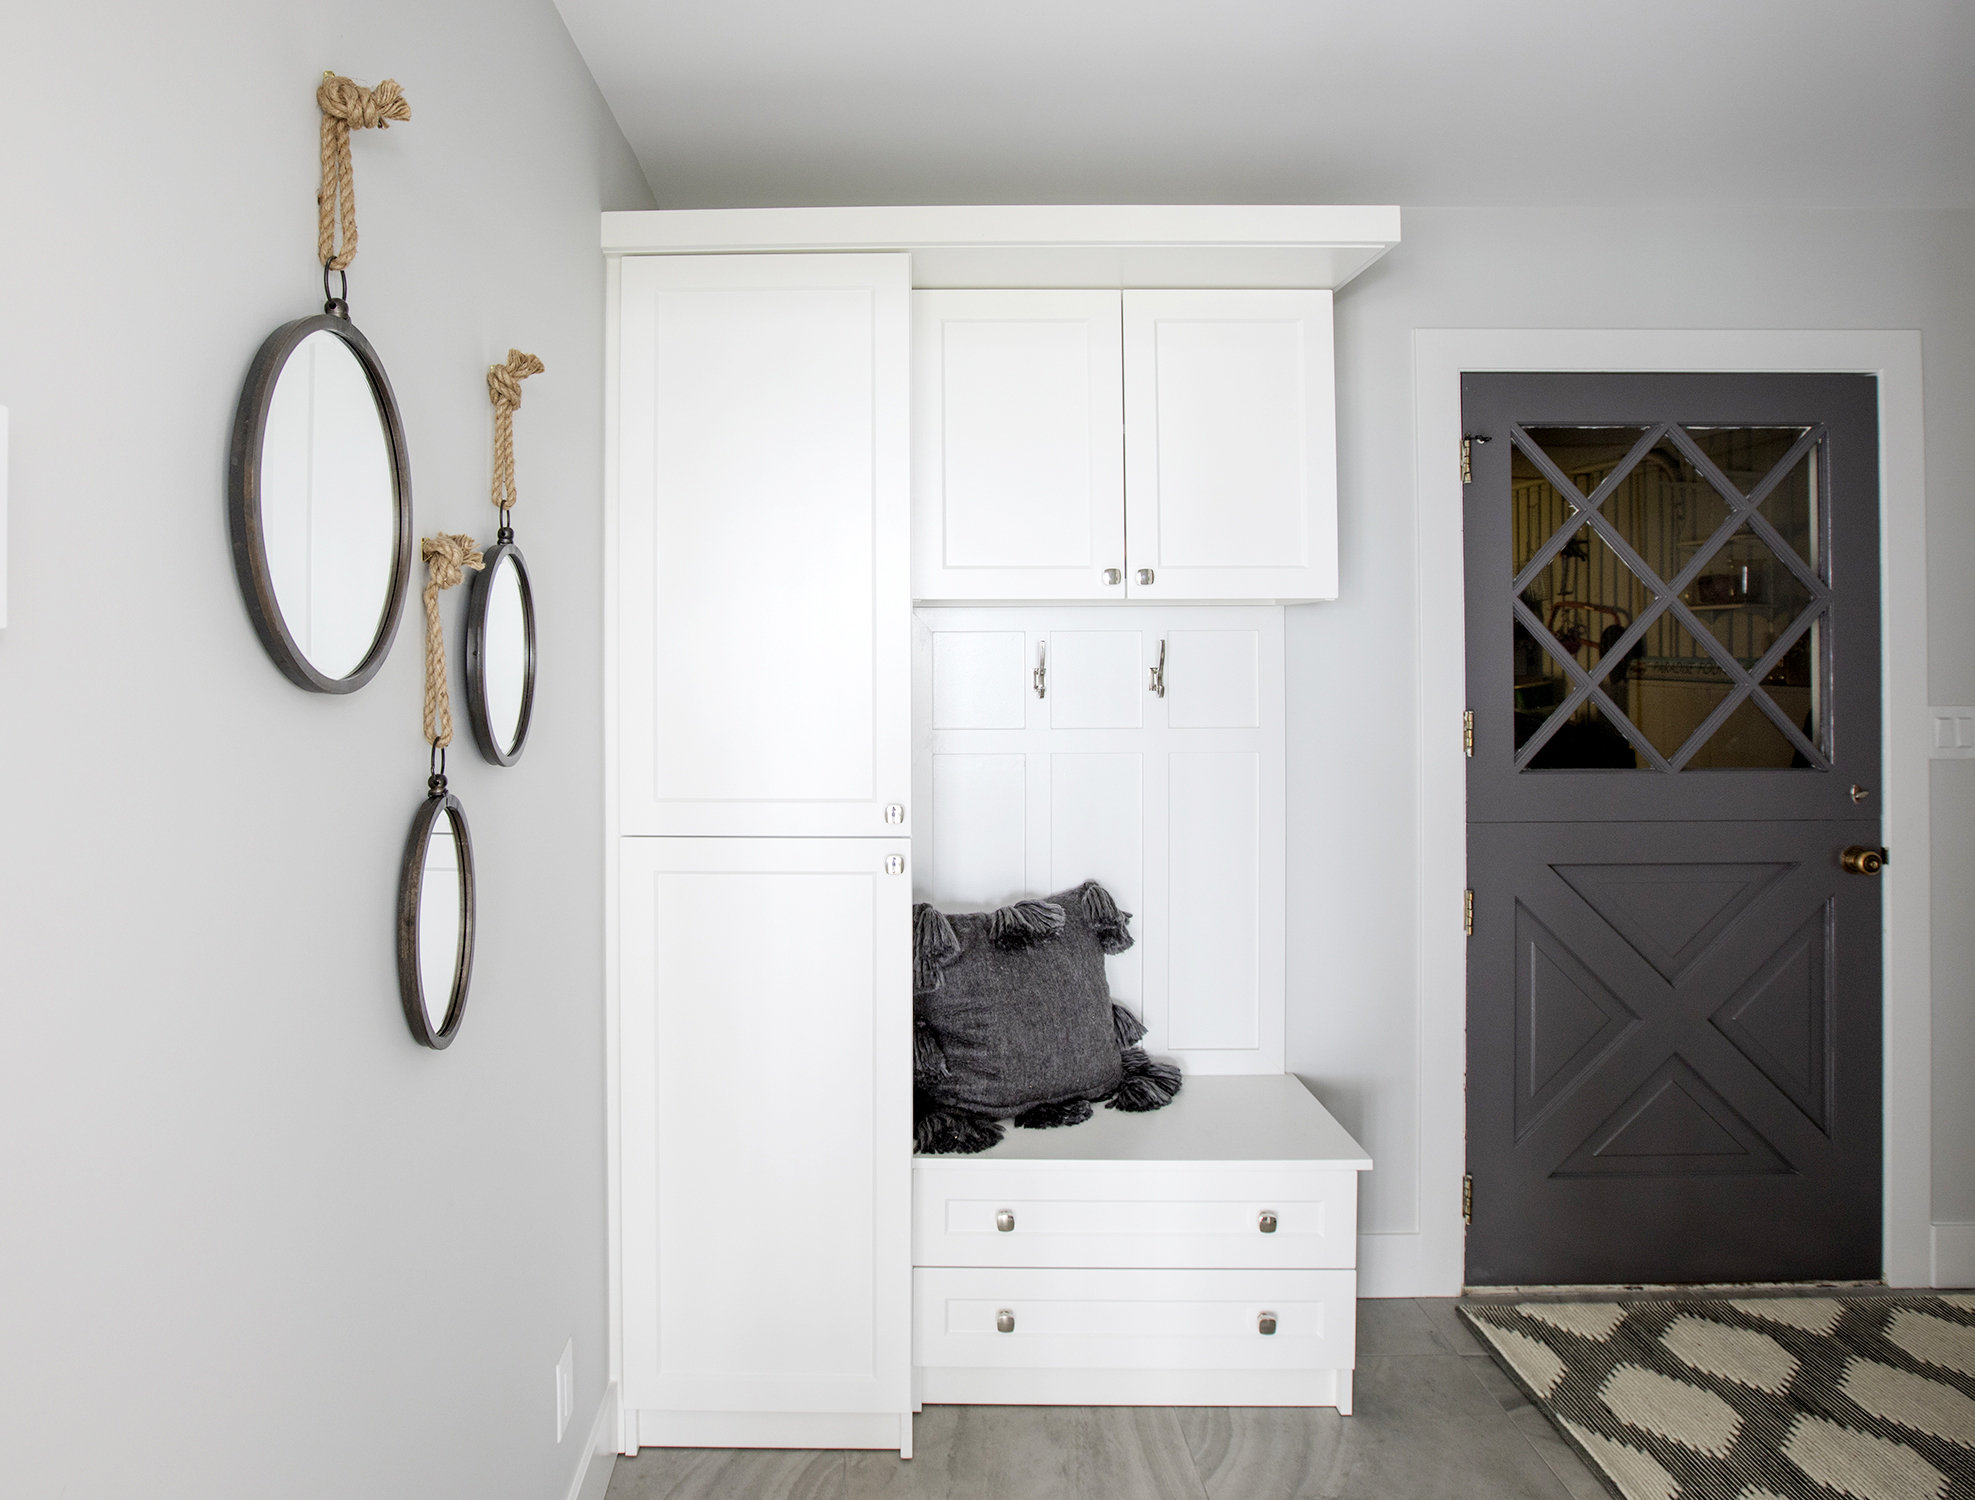 A built-in cabinet is a great way to keep coats, hats and scarves out of view.